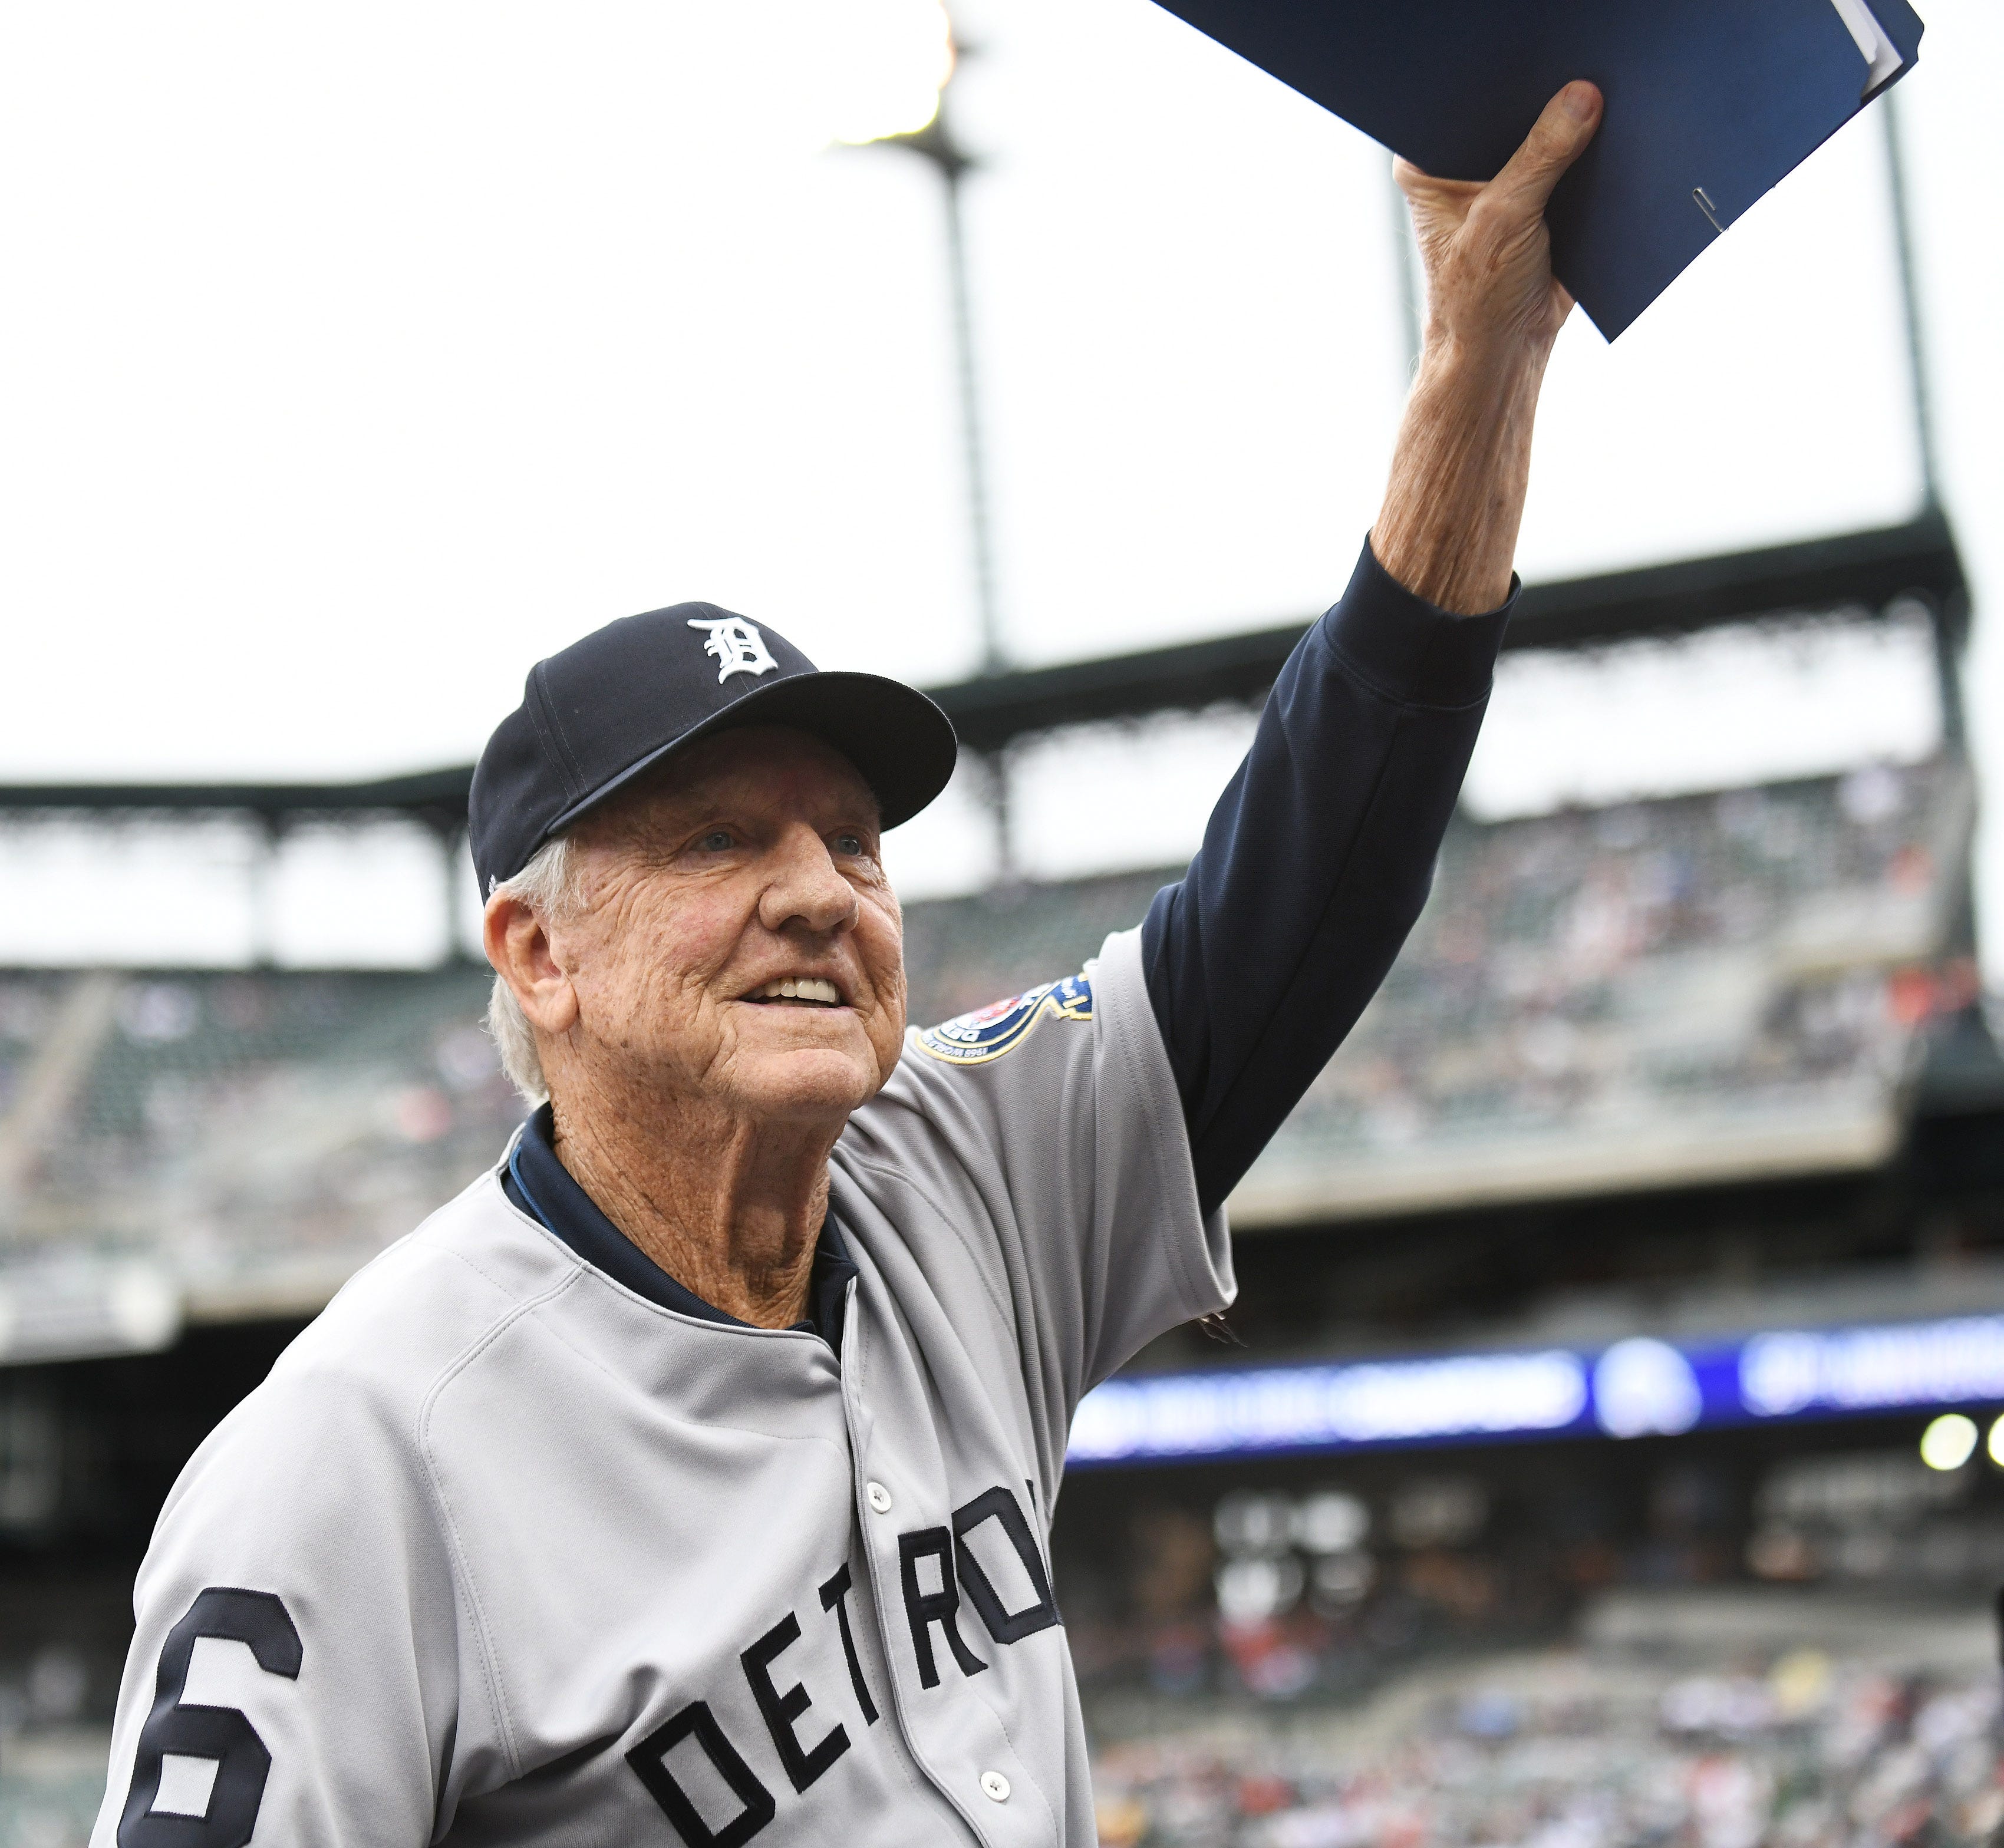 Al Kaline, Hall of Famer and member of the 1968 Tigers, waves to the crowd as he is introduced at Comerica Park in Detroit.